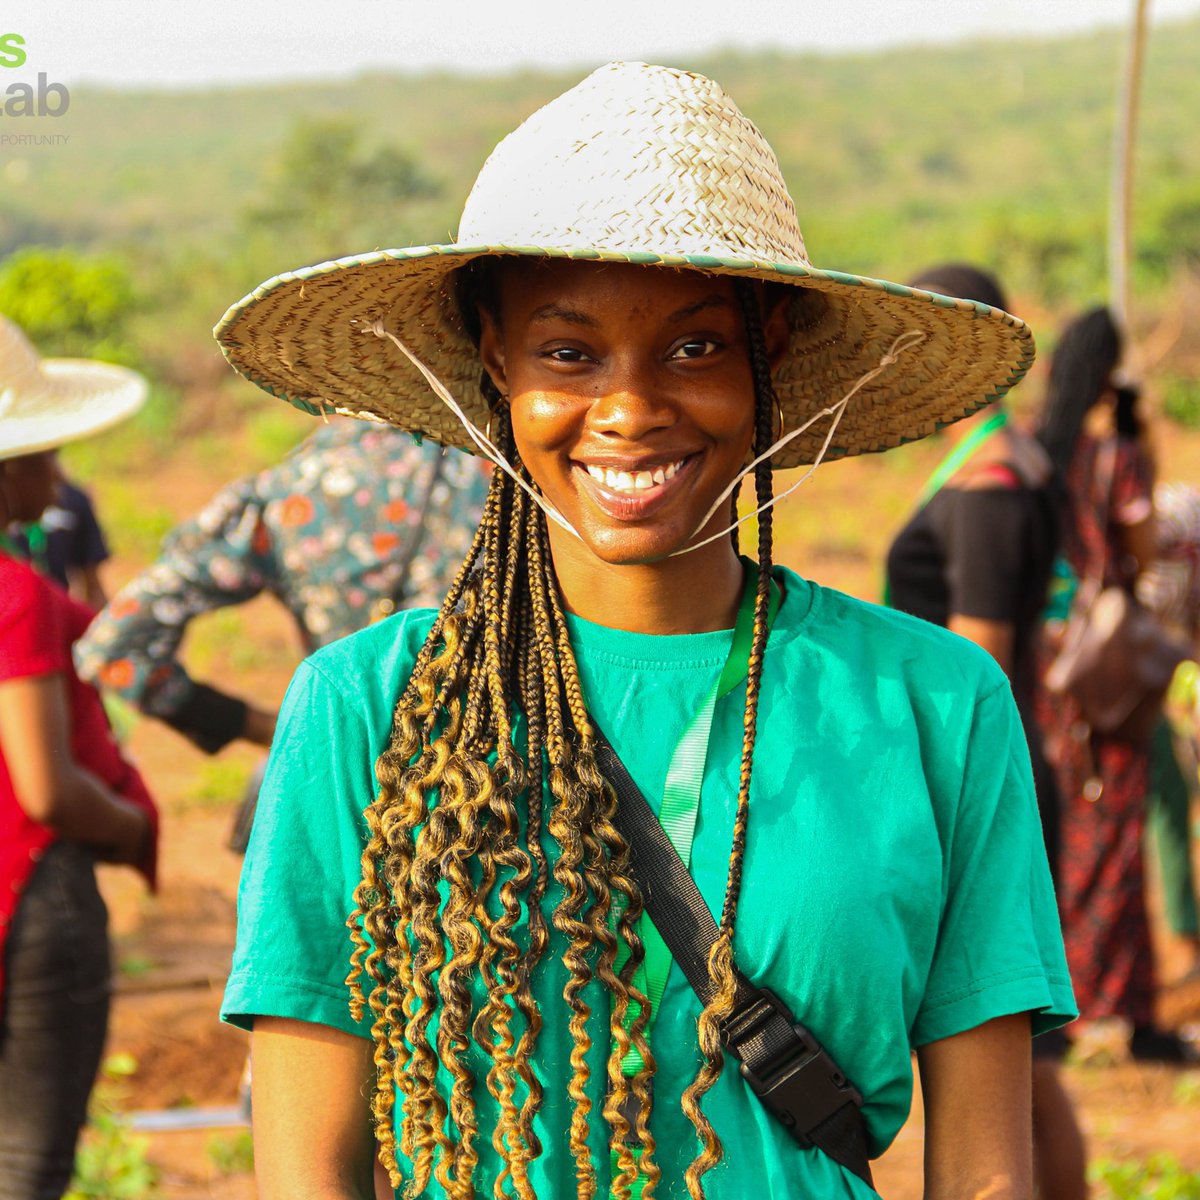 “Opportunity is missed by most people because it is dressed in overalls and looks like work.”

#EYiAprimus #EYiAproject #sfarmlab #womeninagribusiness #soillessfarming #greenhouse #farmerhannahrw #zerohunger #seasonlessgreens #foodsustainability #womeninagriculture